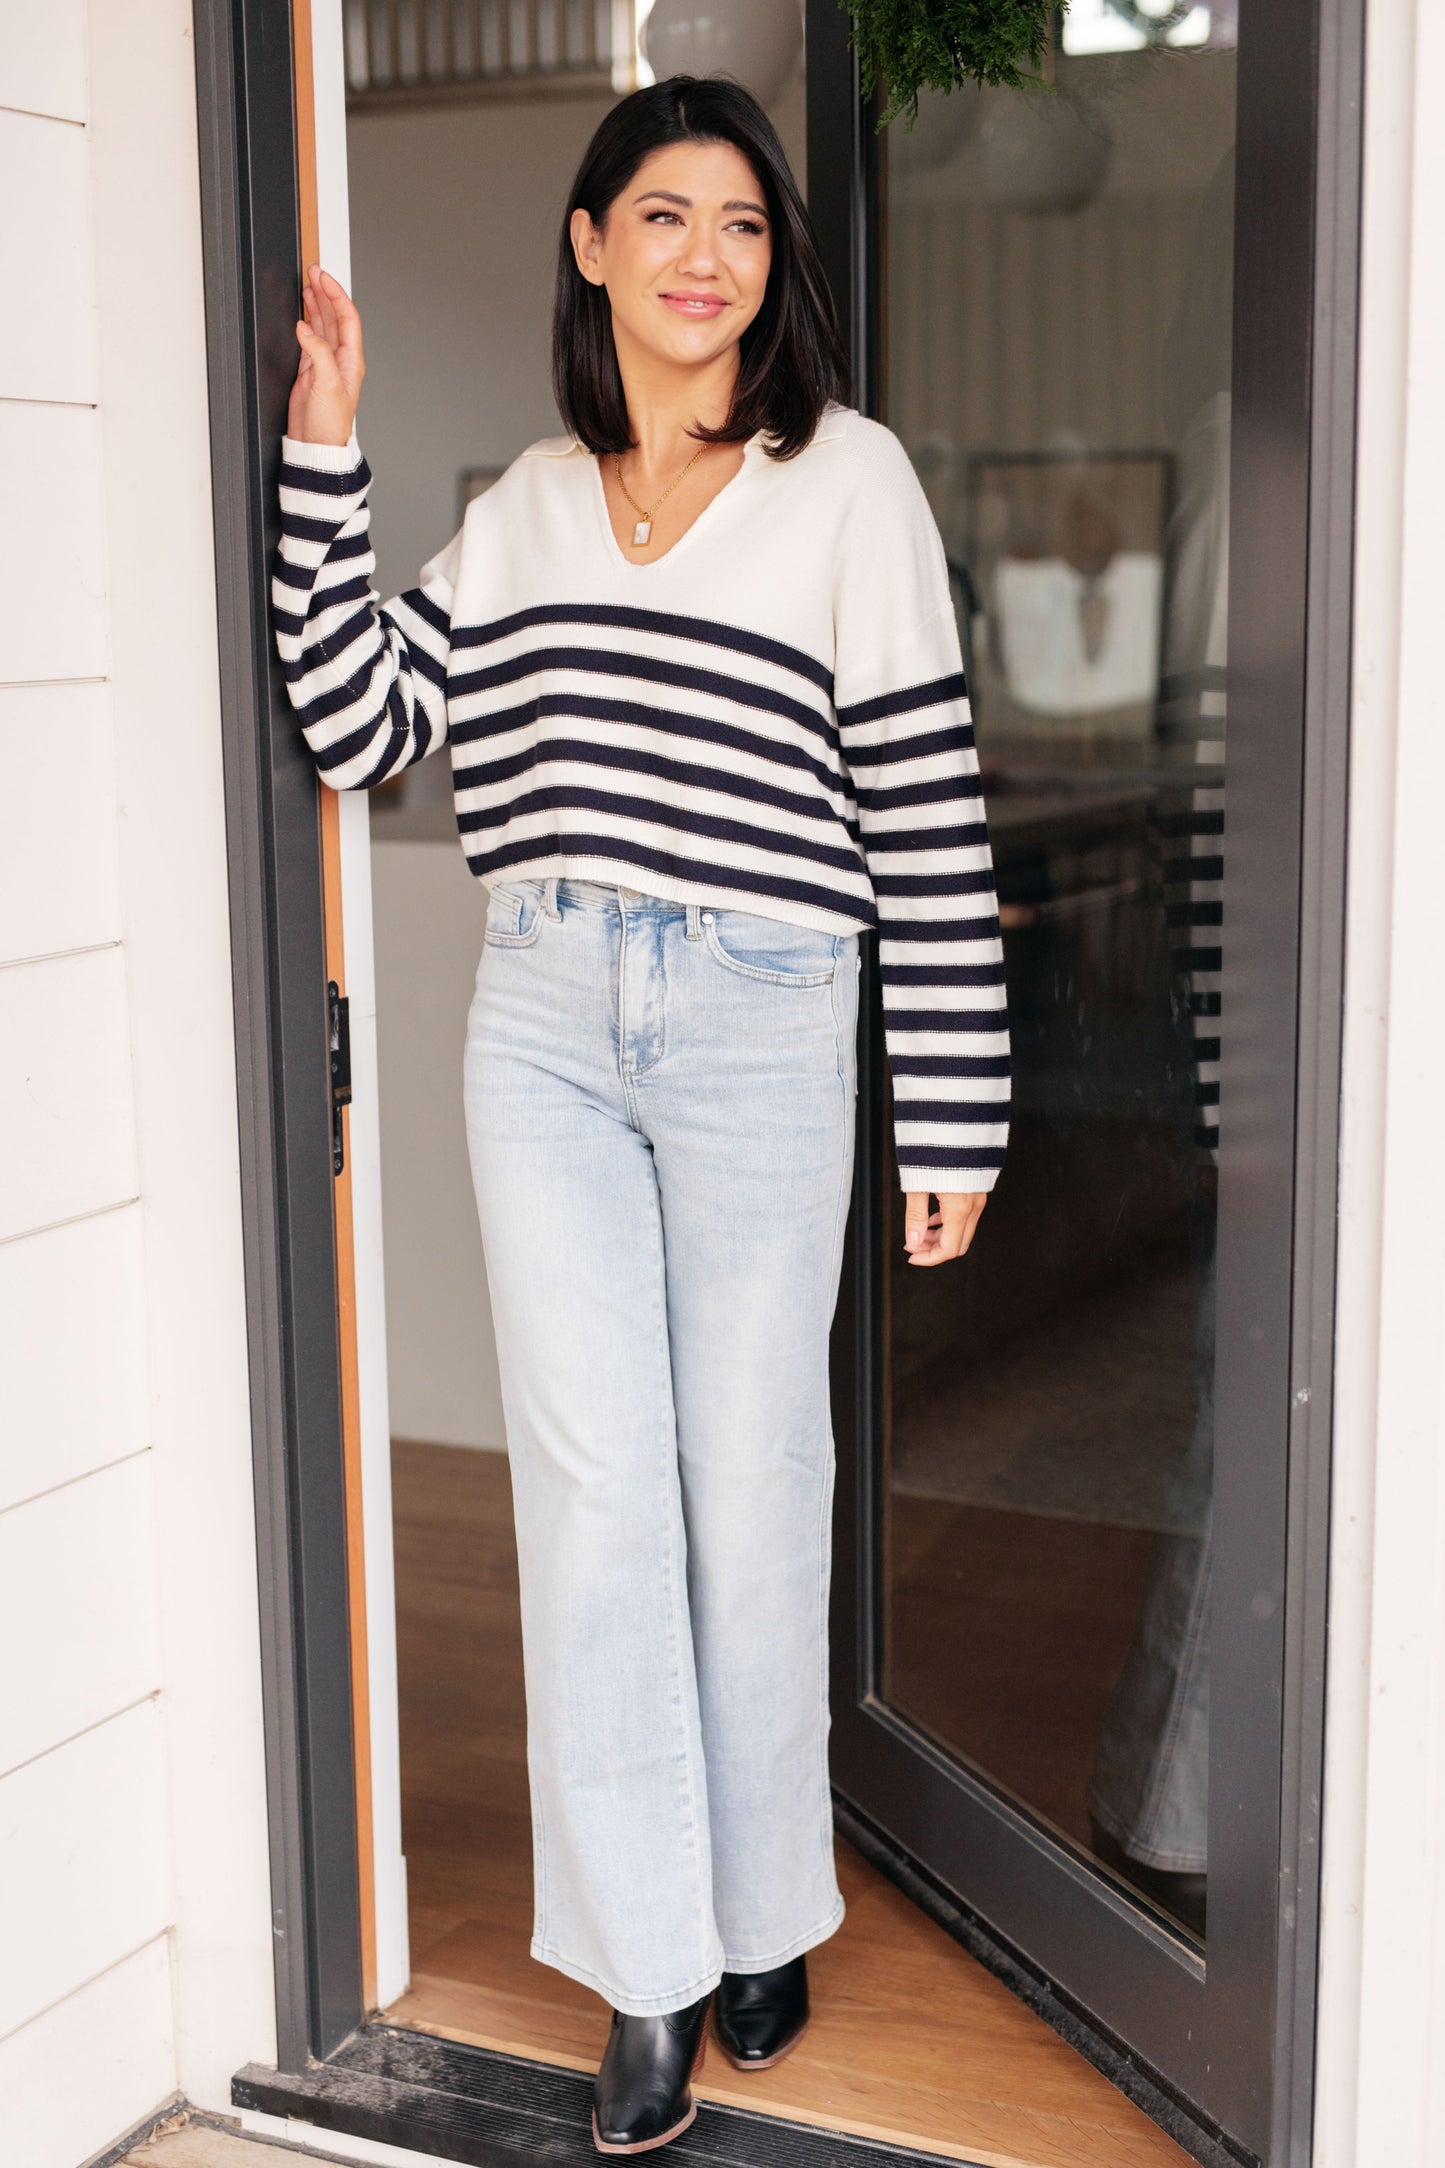 Memorable Moments Striped Sweater in White - Three Bears Boutique